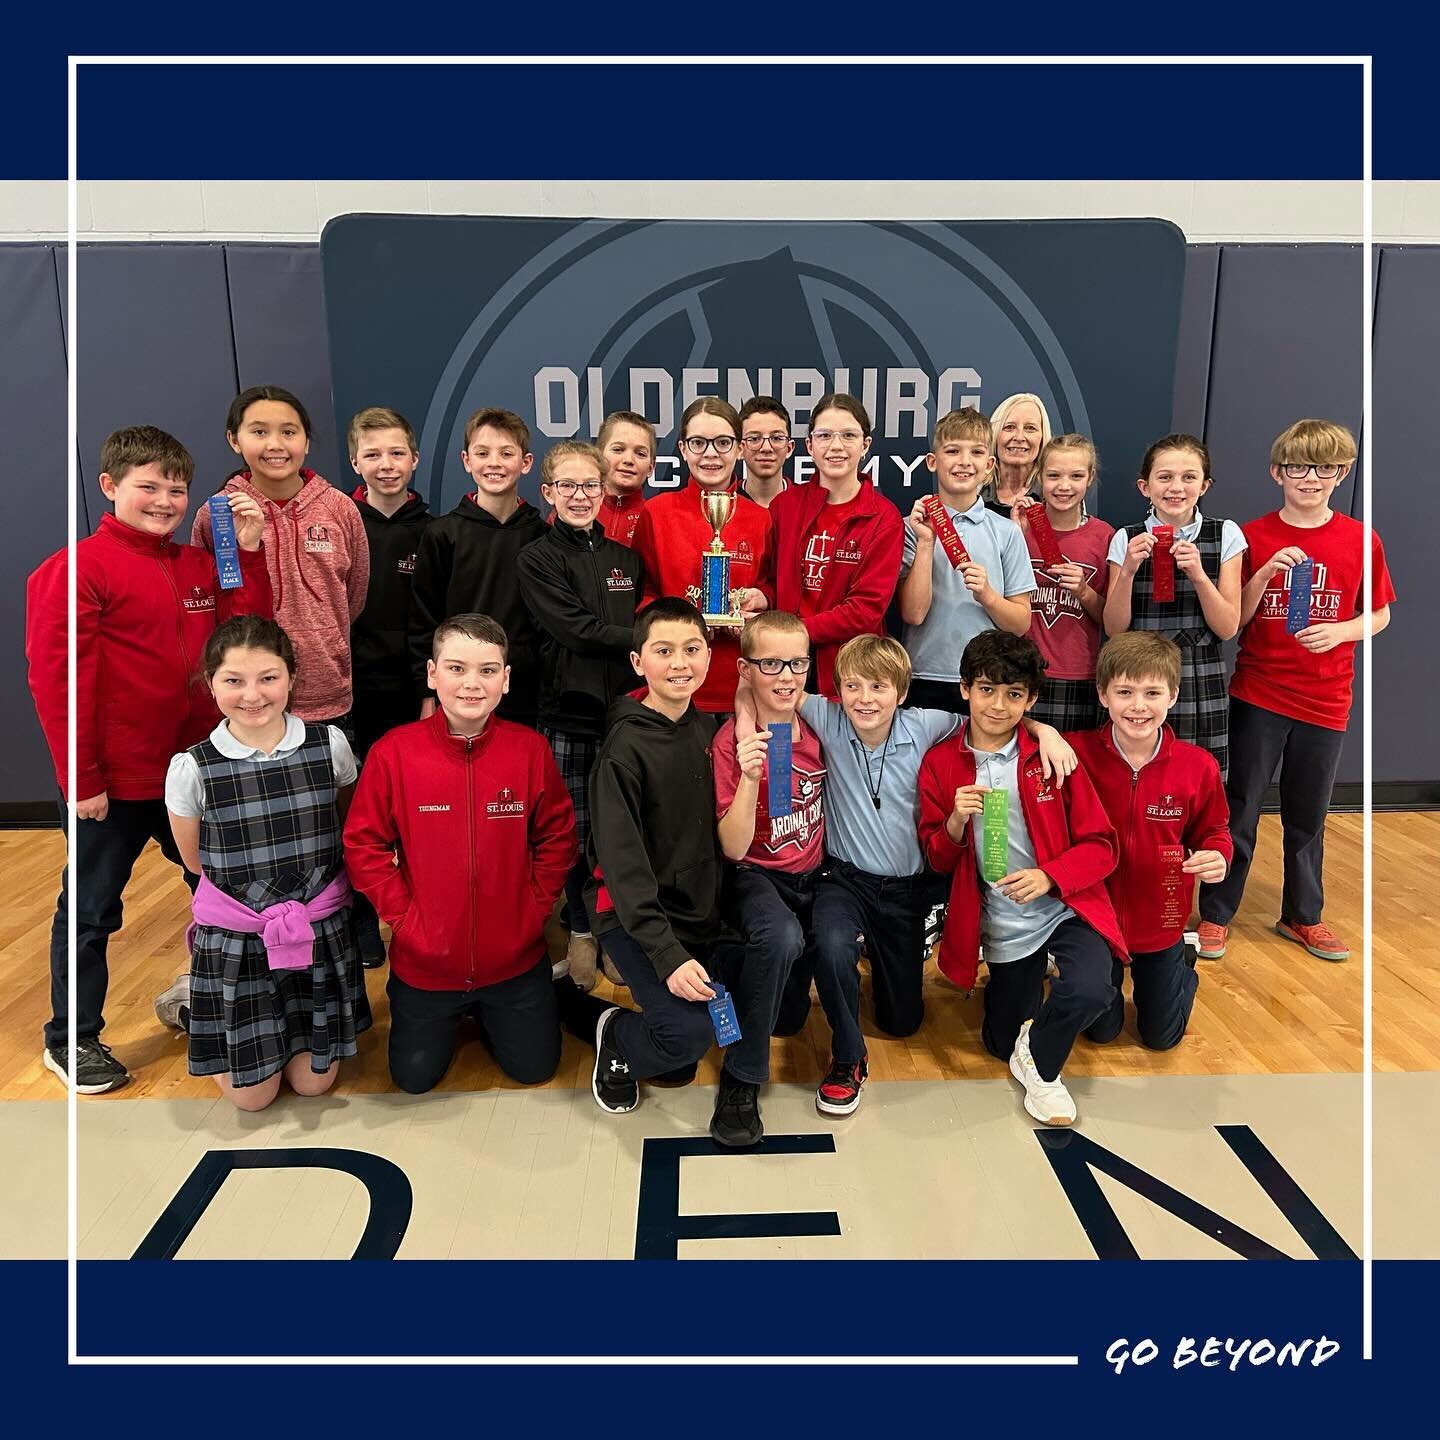 Last Saturday we hosted the 5th and 6th grade Academic Meet in the OA Feldhaus. St. Mary&rsquo;s Greensburg, St. Lawrence, St. Nicholas, St. Michael and St. Louis schools all came together to participate in this fun and academic event!

Congratulatio